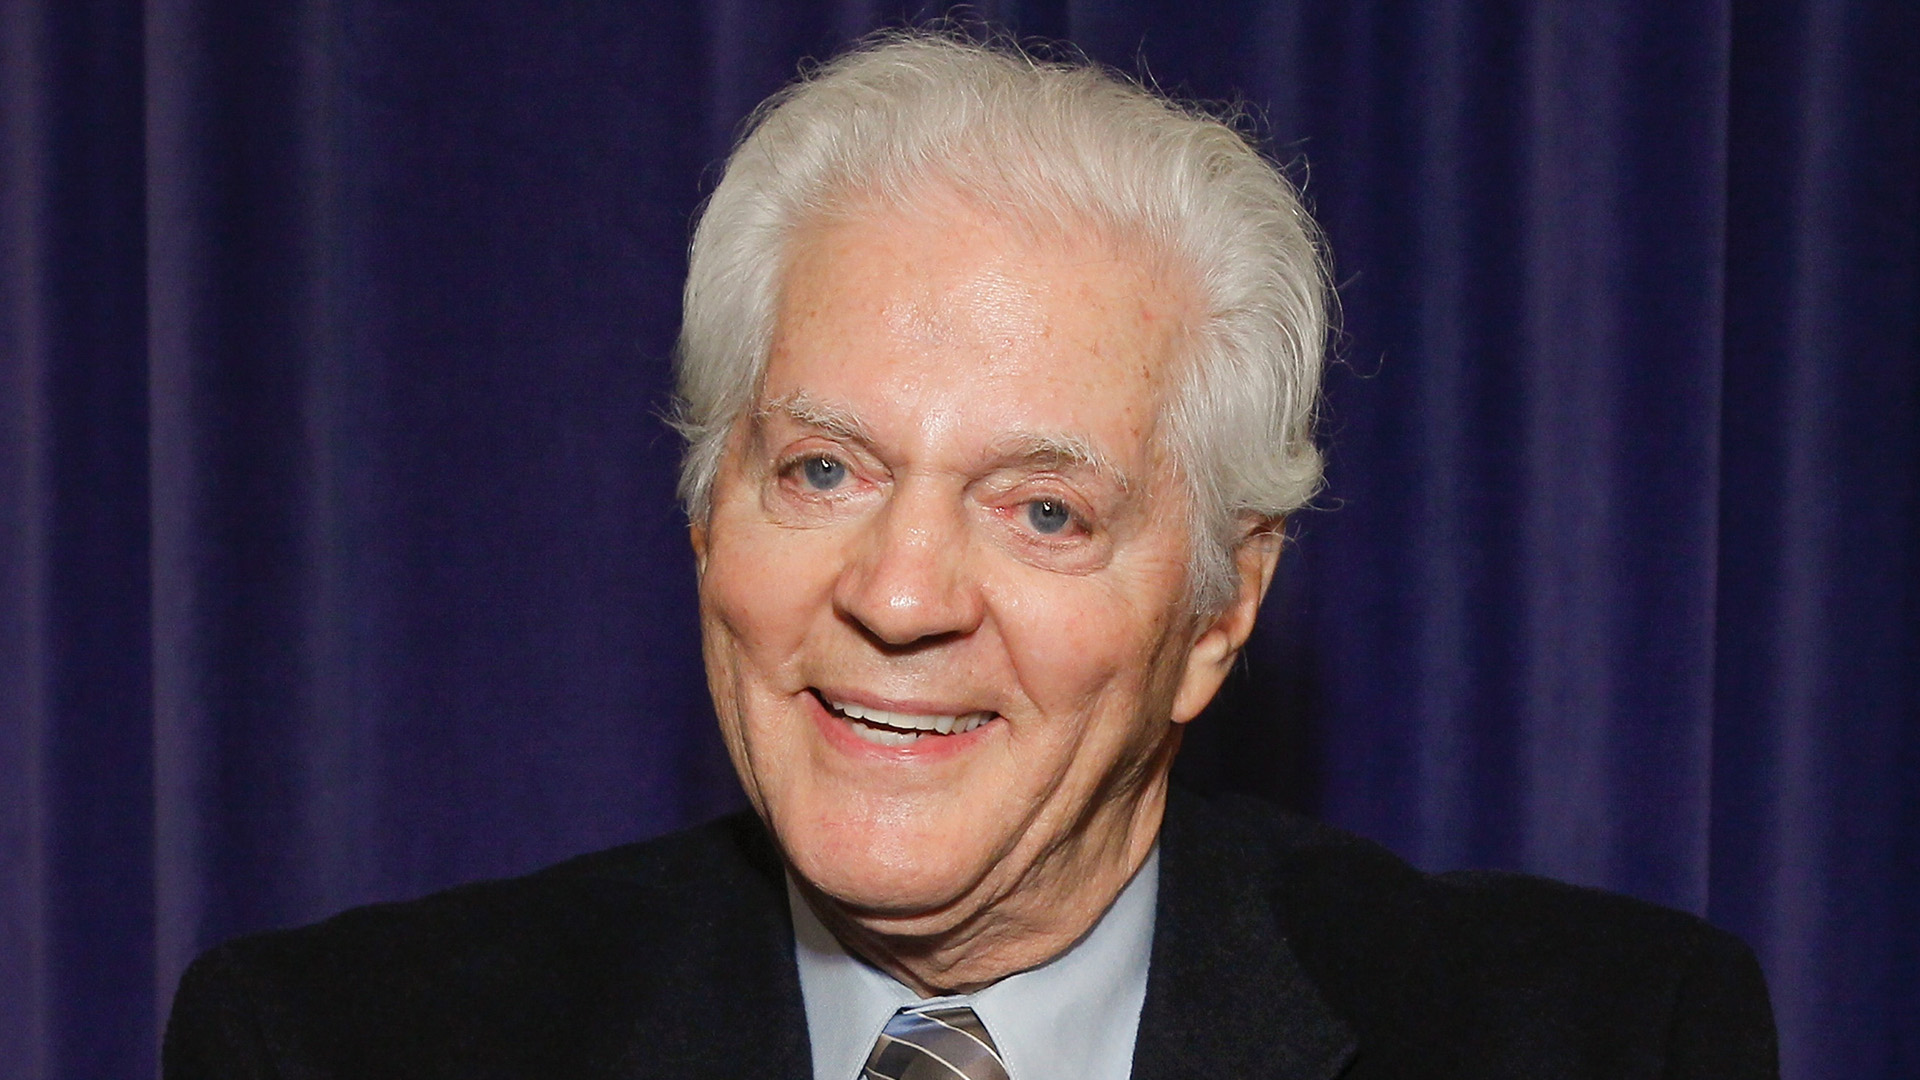 Bill Hayes, Beloved "Days of Our Lives" Star, Passes Away at 98